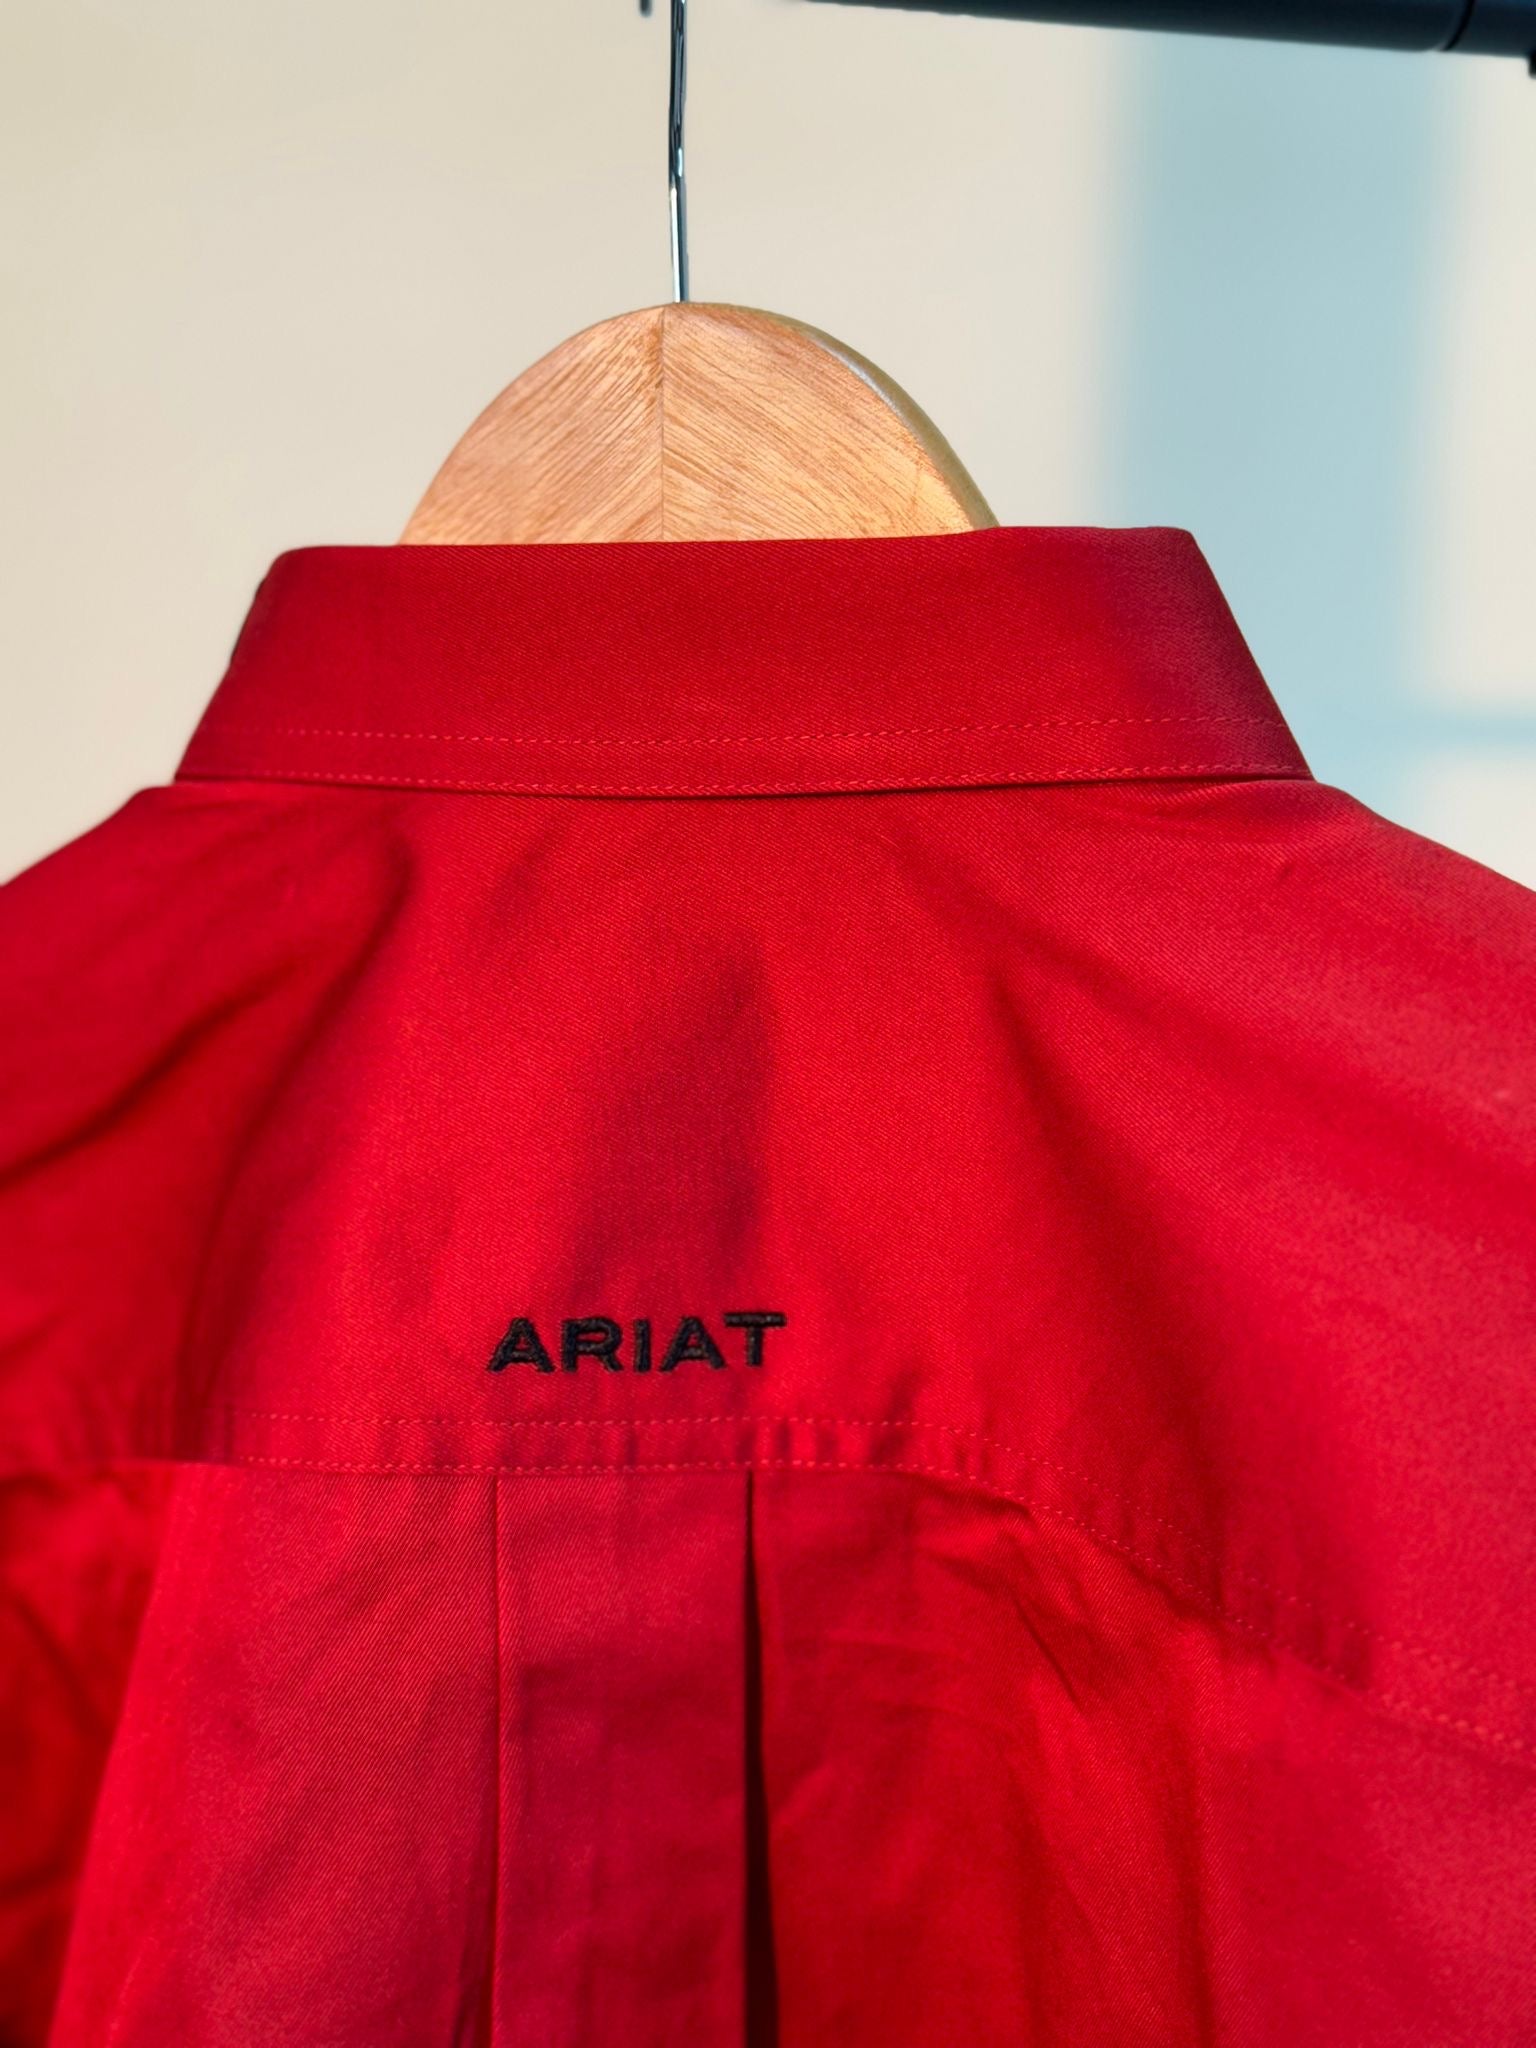 ARIAT TEAM LOGO TWILL RED CLASSIC FIT LONG SLEEVE SHIRT 10048809